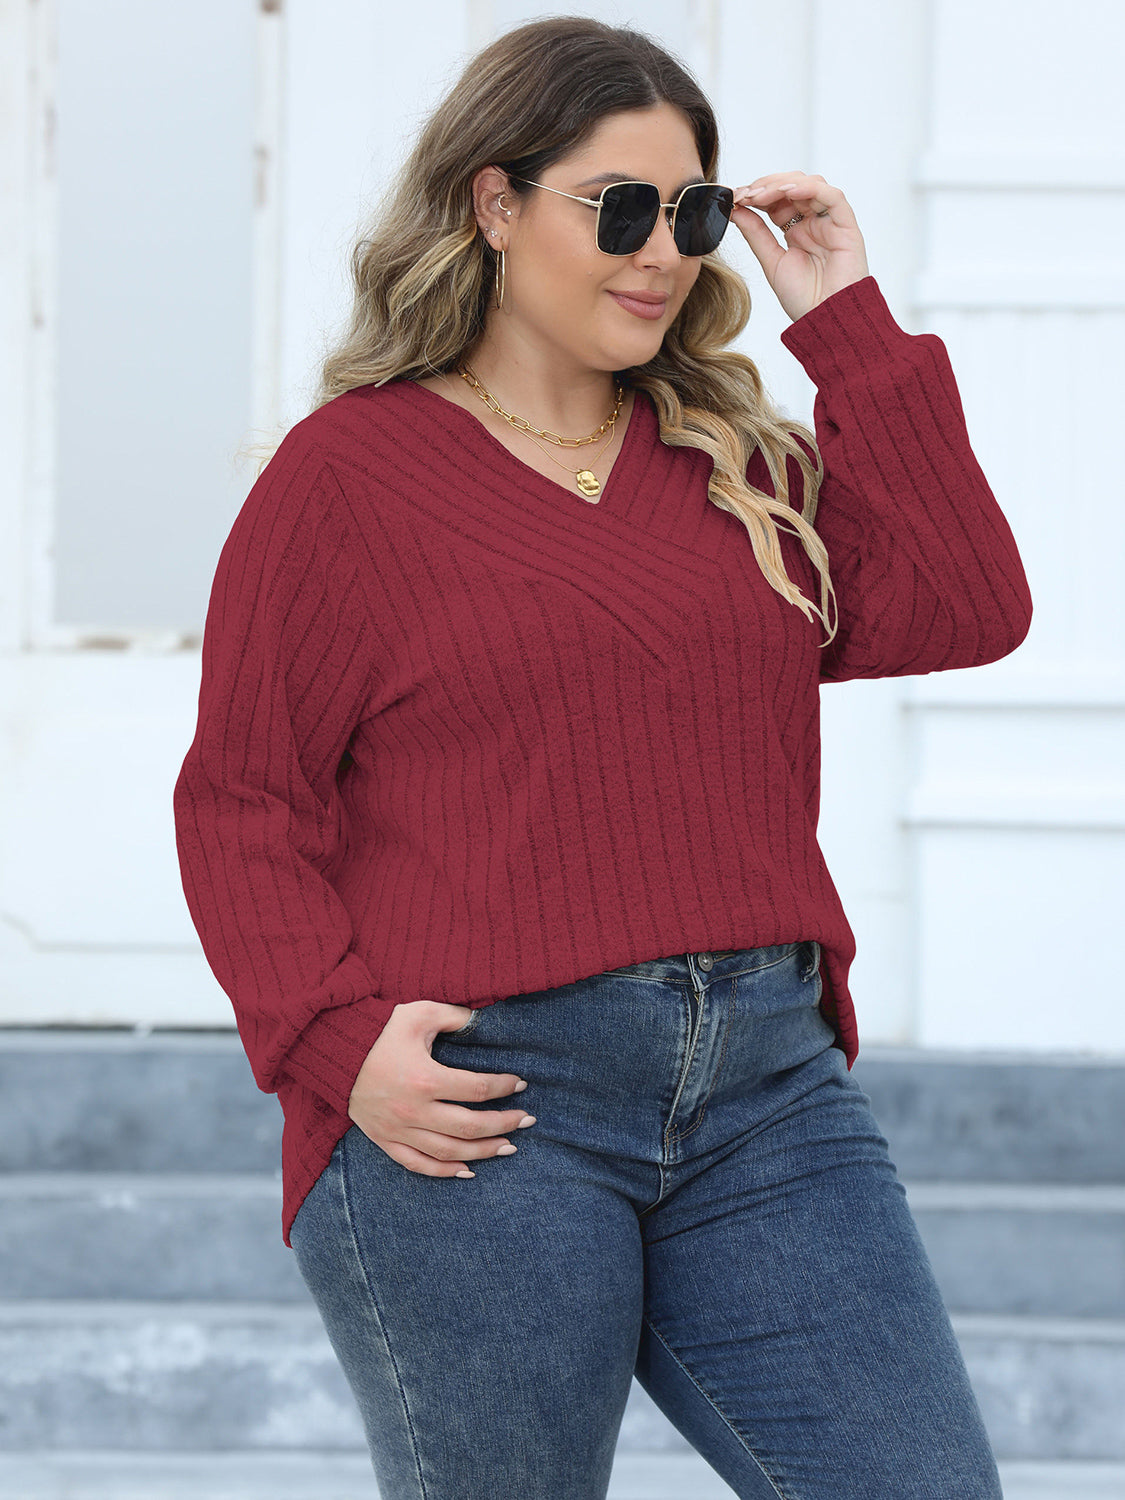 Plus Size Ribbed V-Neck Long Sleeve Top